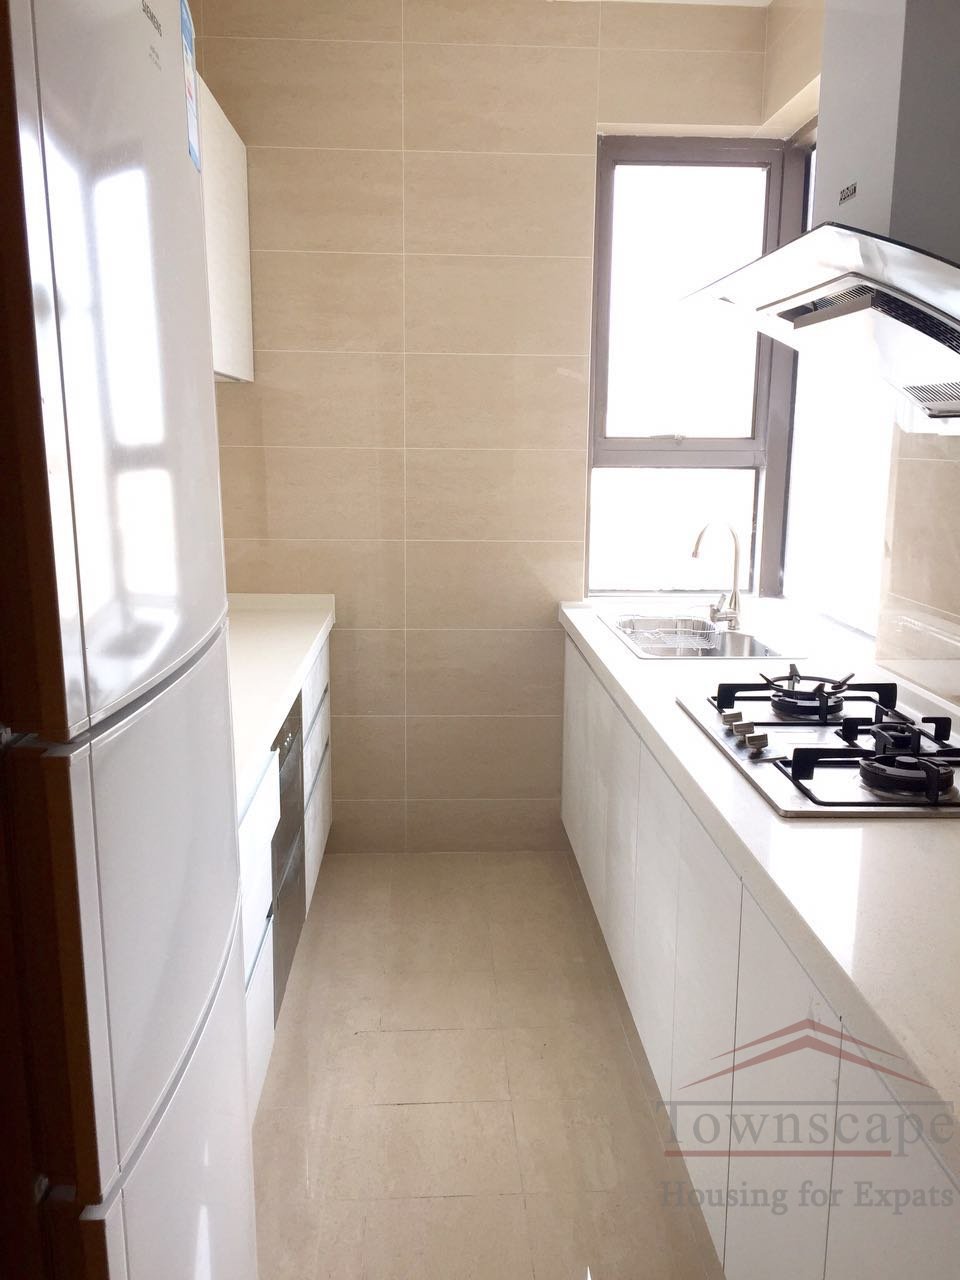 French concession, western-style kitchen; french concession 4BR Apartment for rent